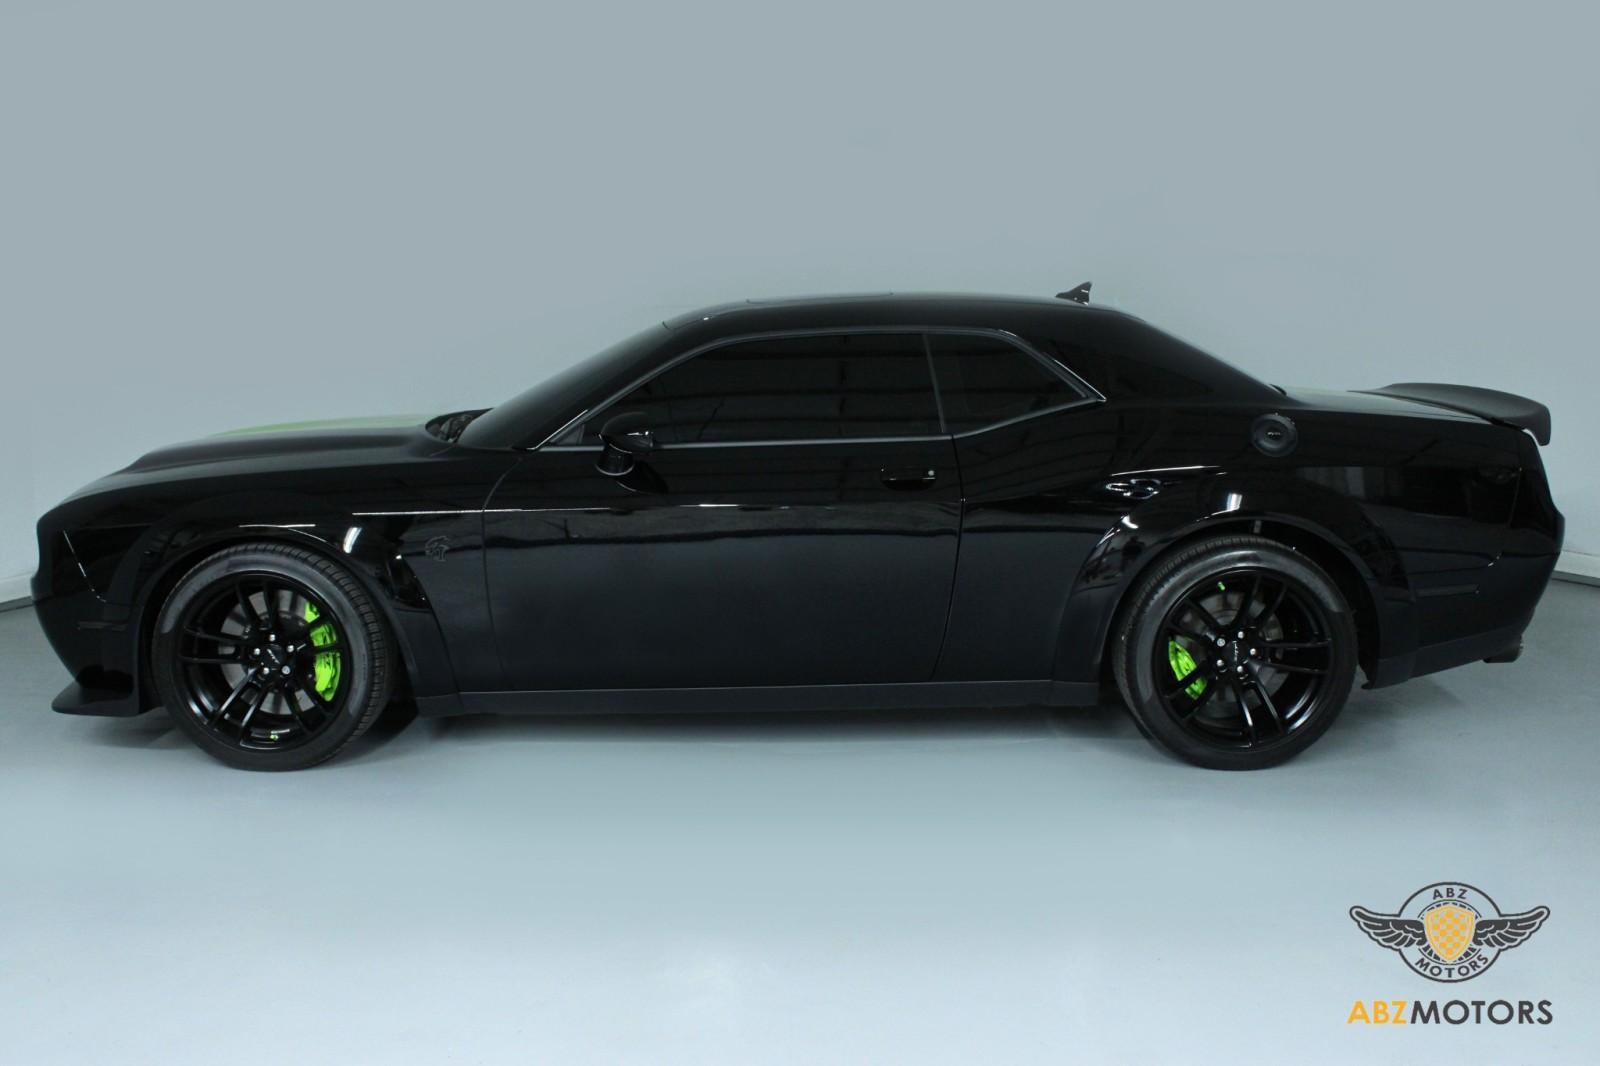 Dodge Brand Breaks All the Rules with Jailbreak Model for 2022 Dodge  Charger and Challenger SRT® Hellcat Redeye Widebody